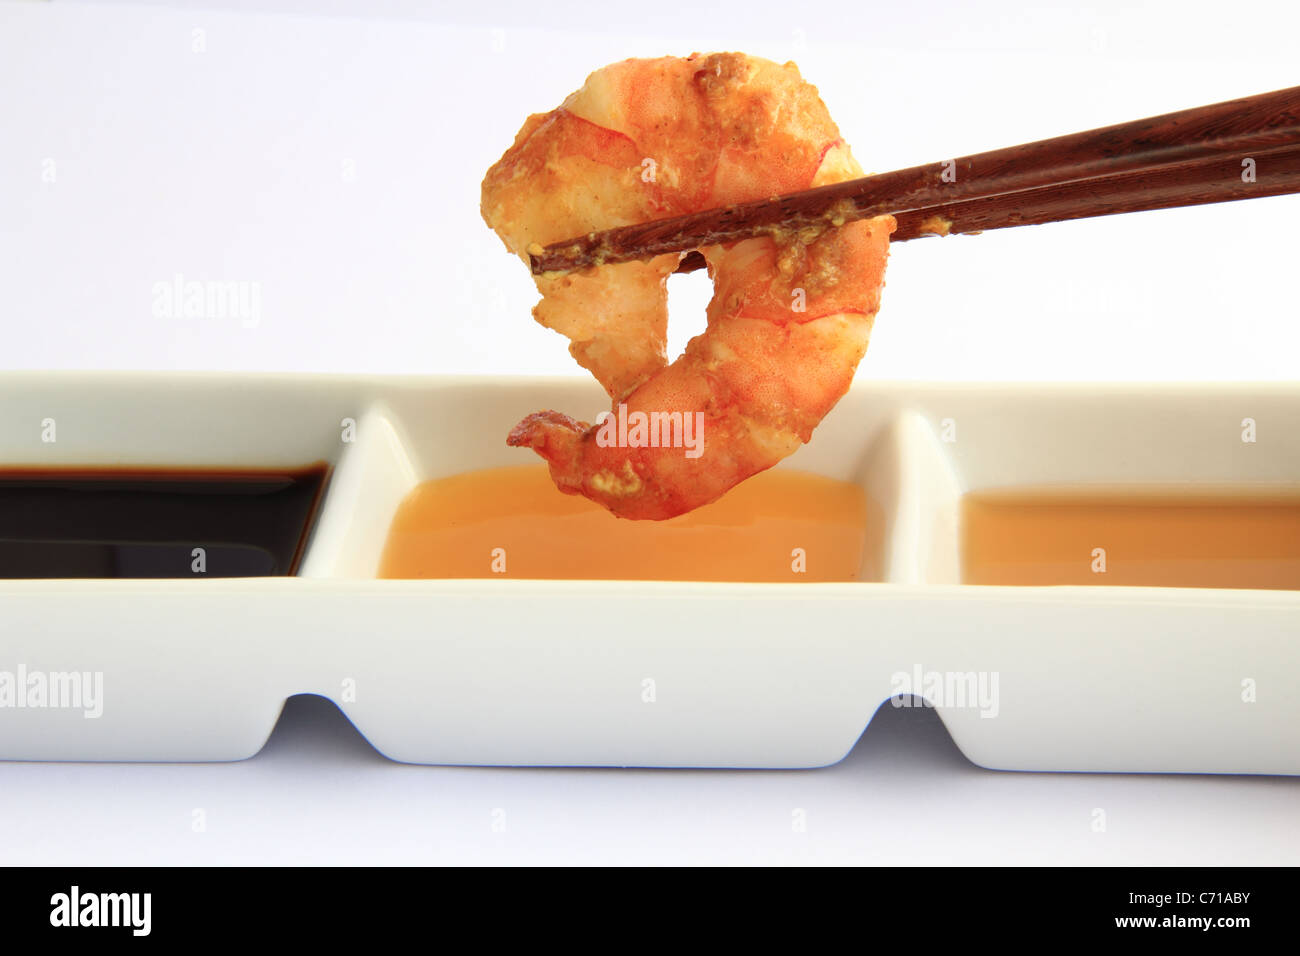 chopstick holding a prawn and dipping sauces Stock Photo